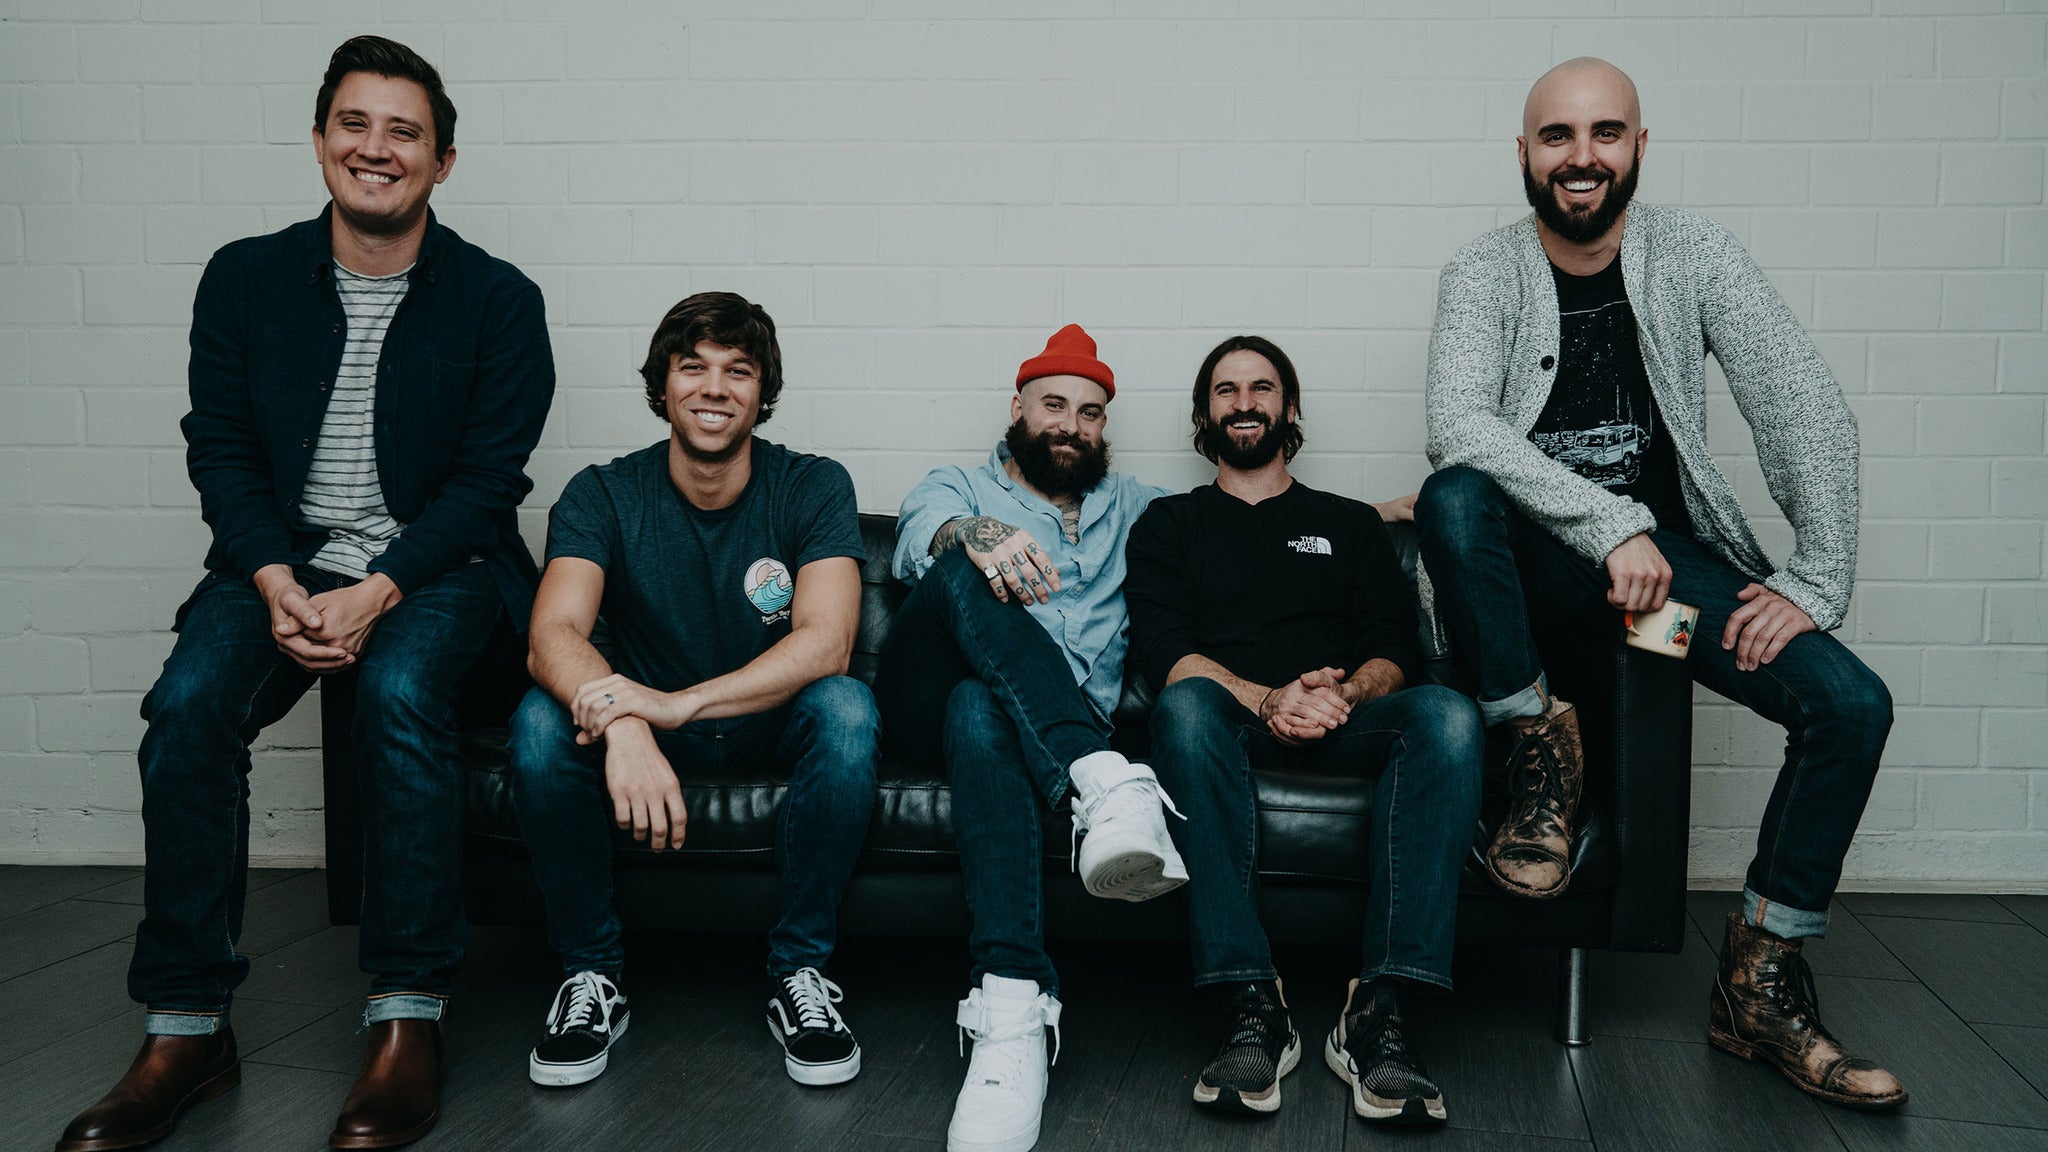 Image used with permission from Ticketmaster | August Burns Red tickets